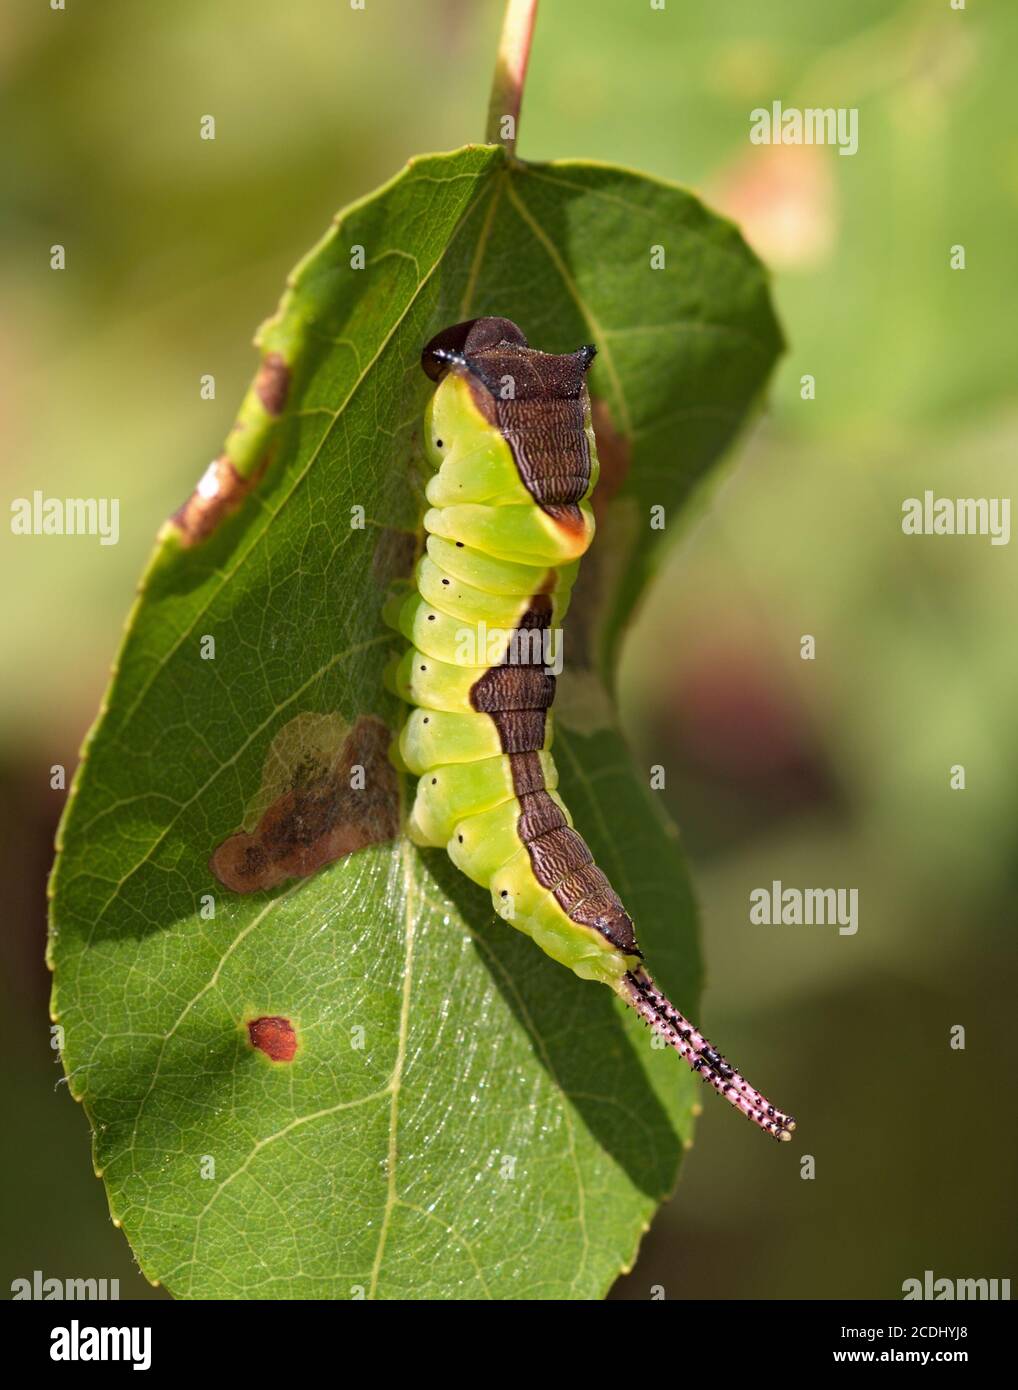 Green large caterpillar on a leaf Stock Photo